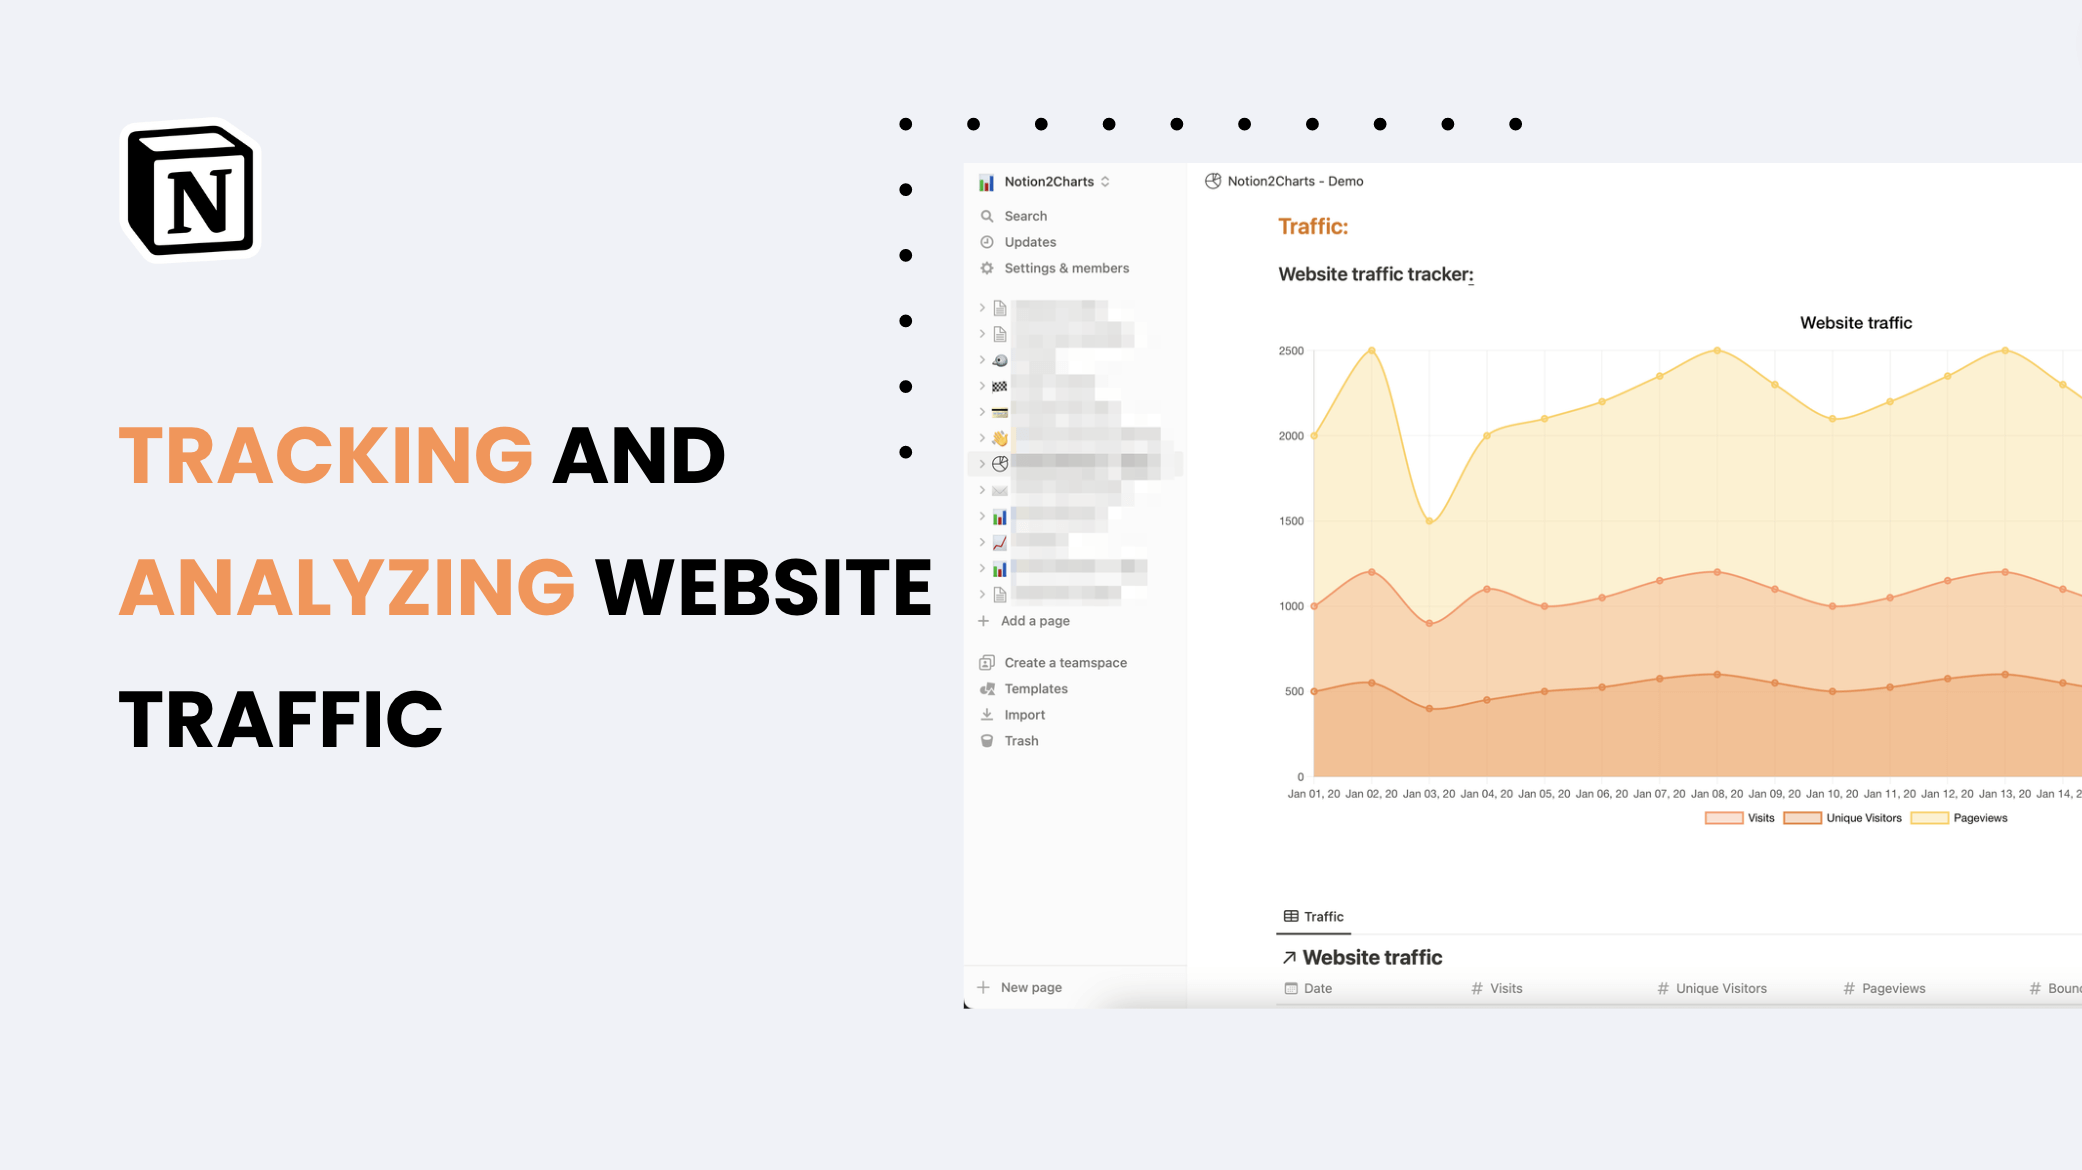 Tracking and analyzing website traffic with Notion2Charts